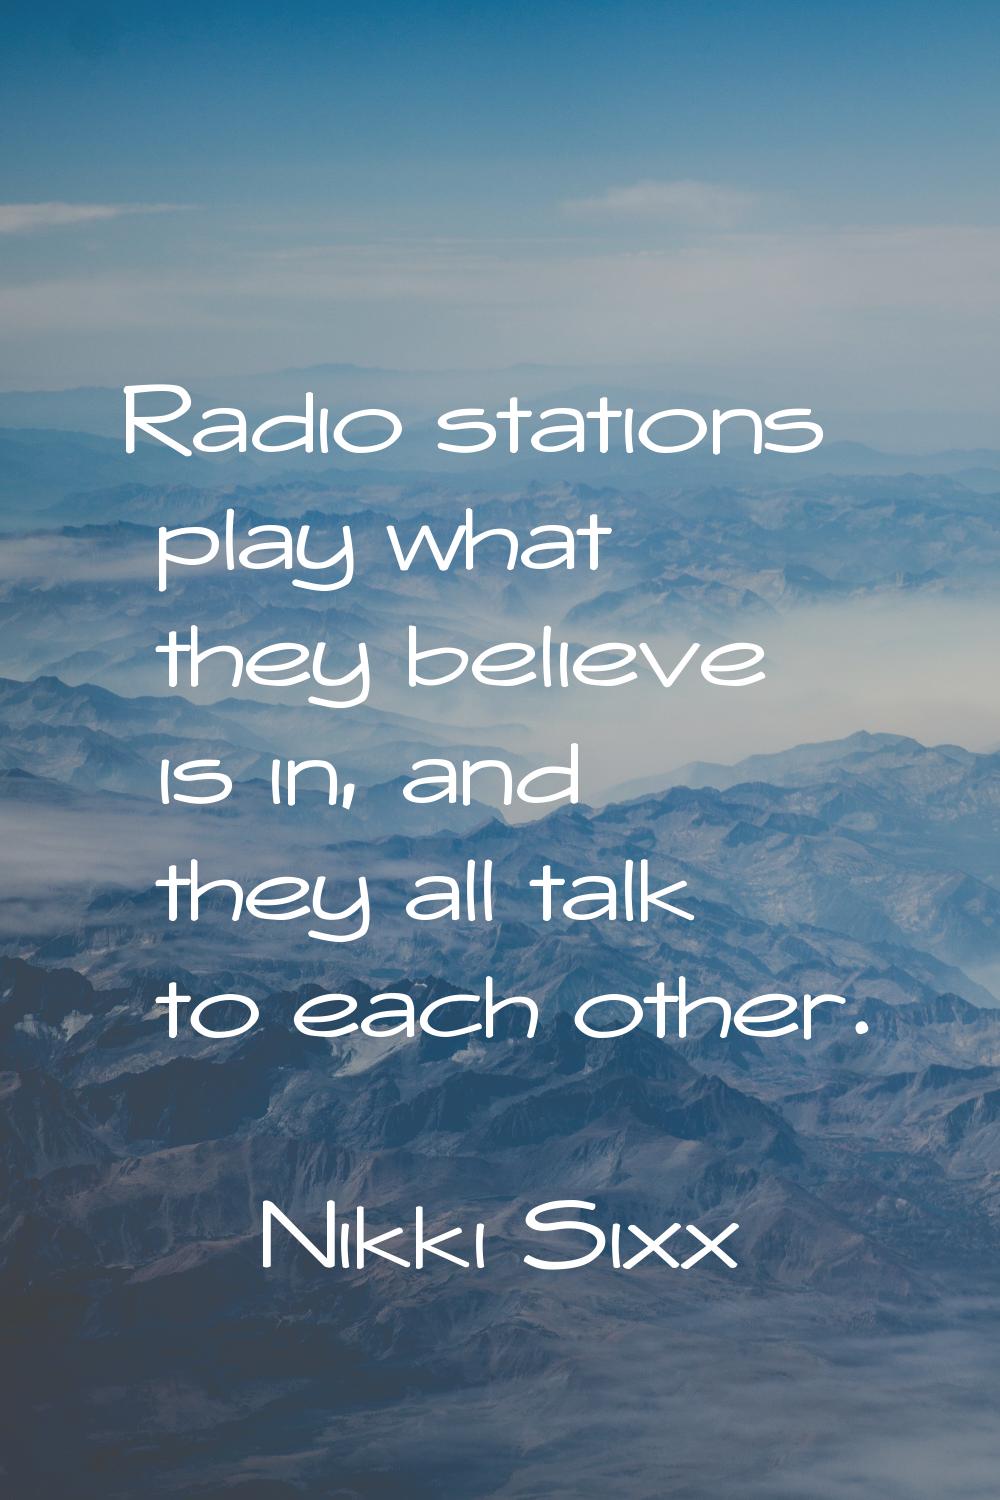 Radio stations play what they believe is in, and they all talk to each other.